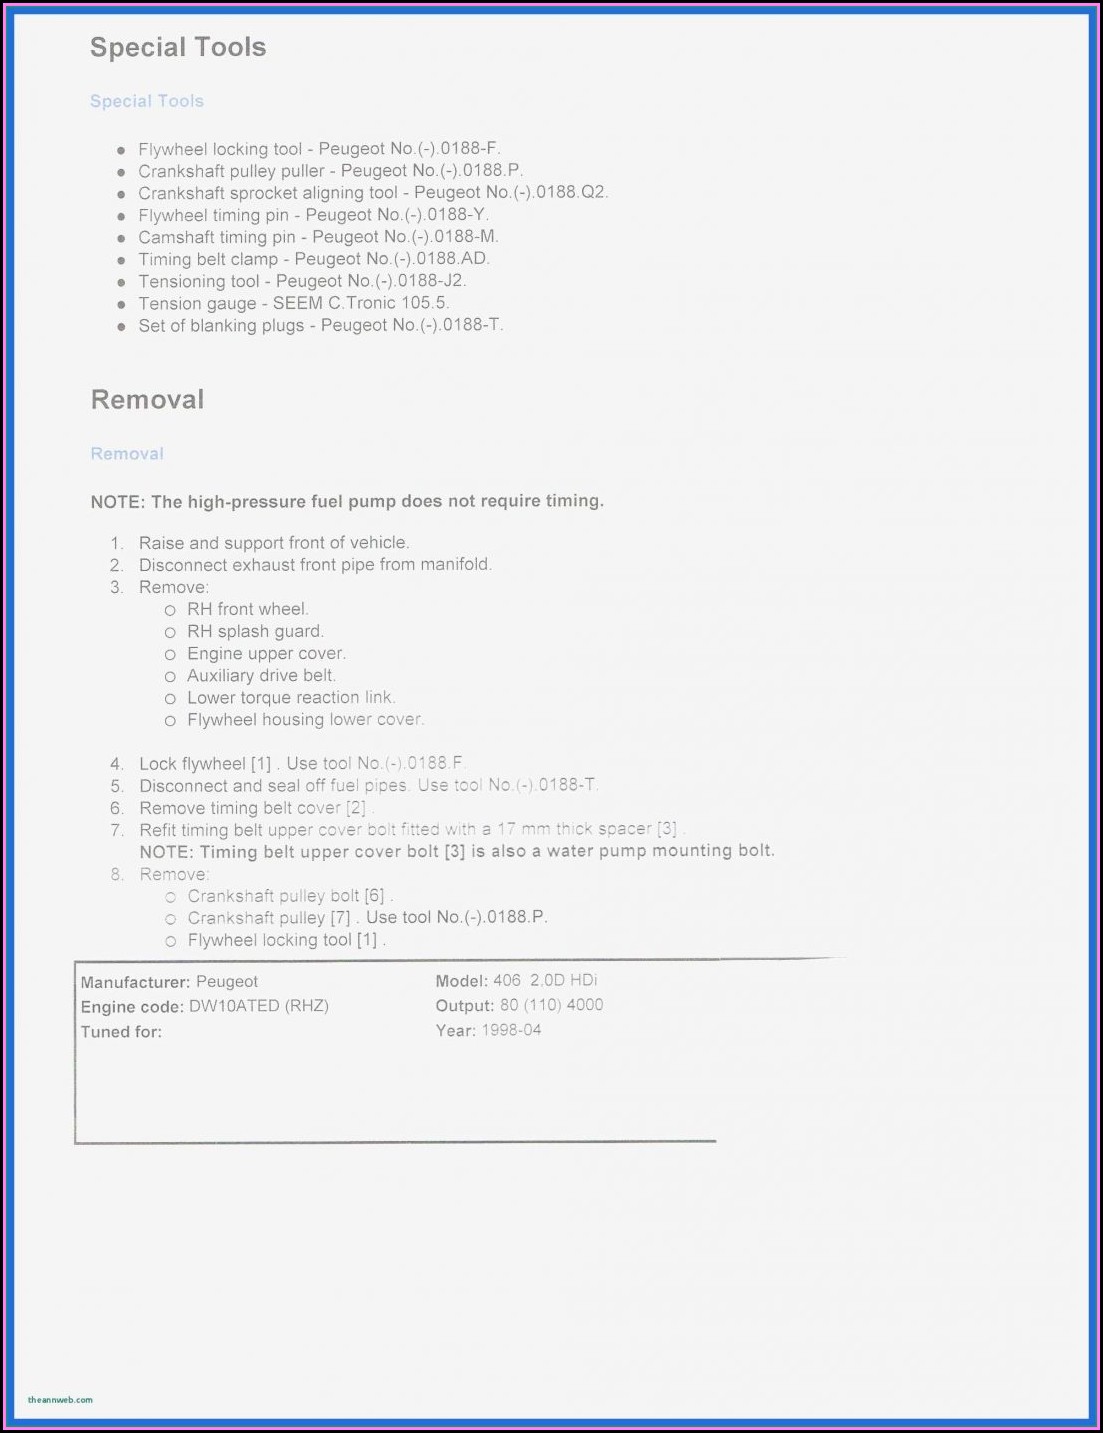 Best Resume Format For Freshers Ece Engineers Free Download Pdf